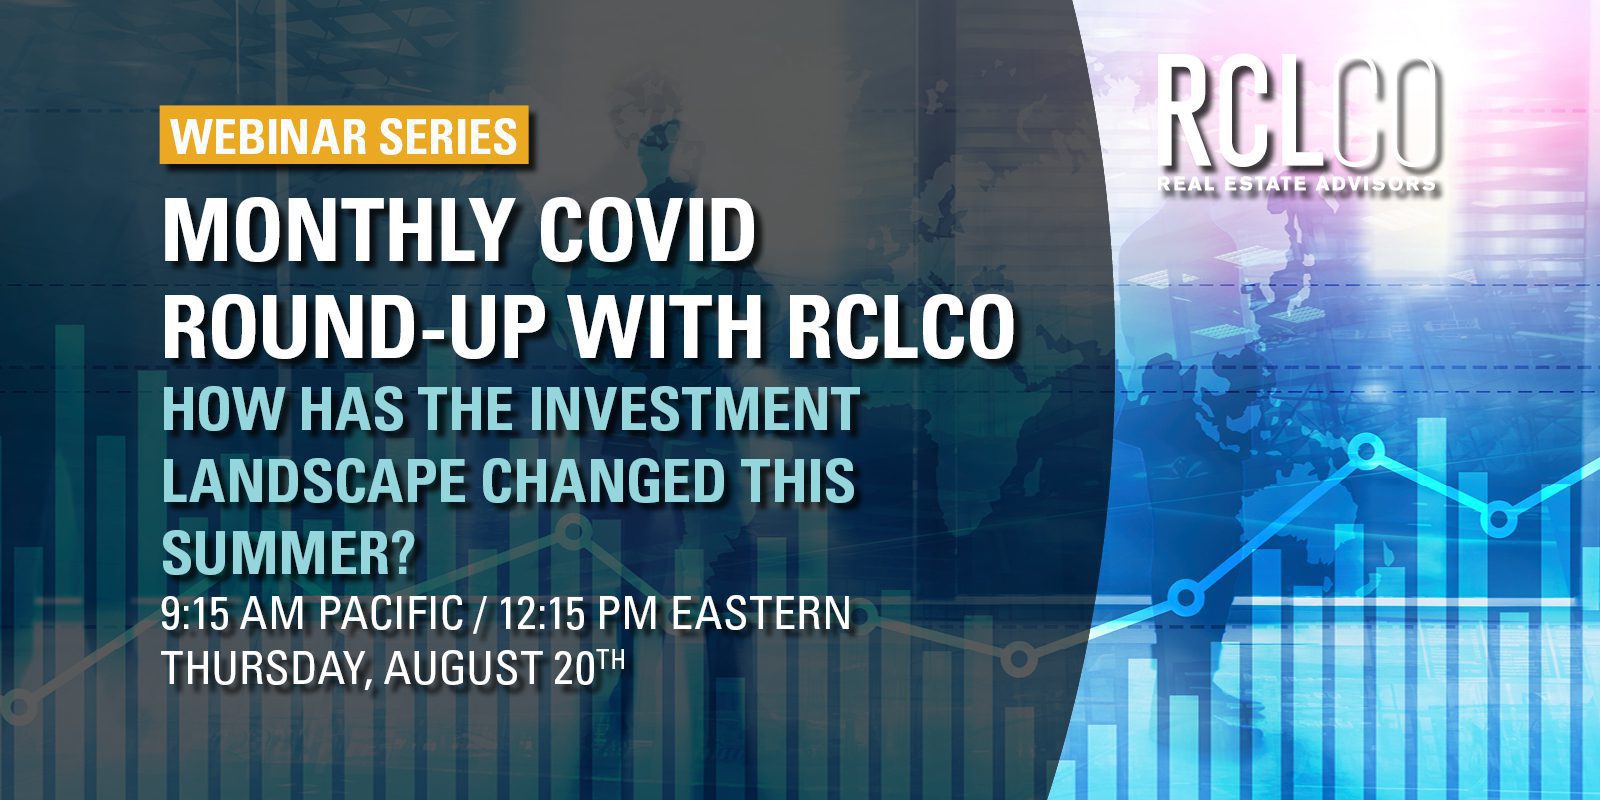 RCLCO COVID Round-Up: August 20, 2020